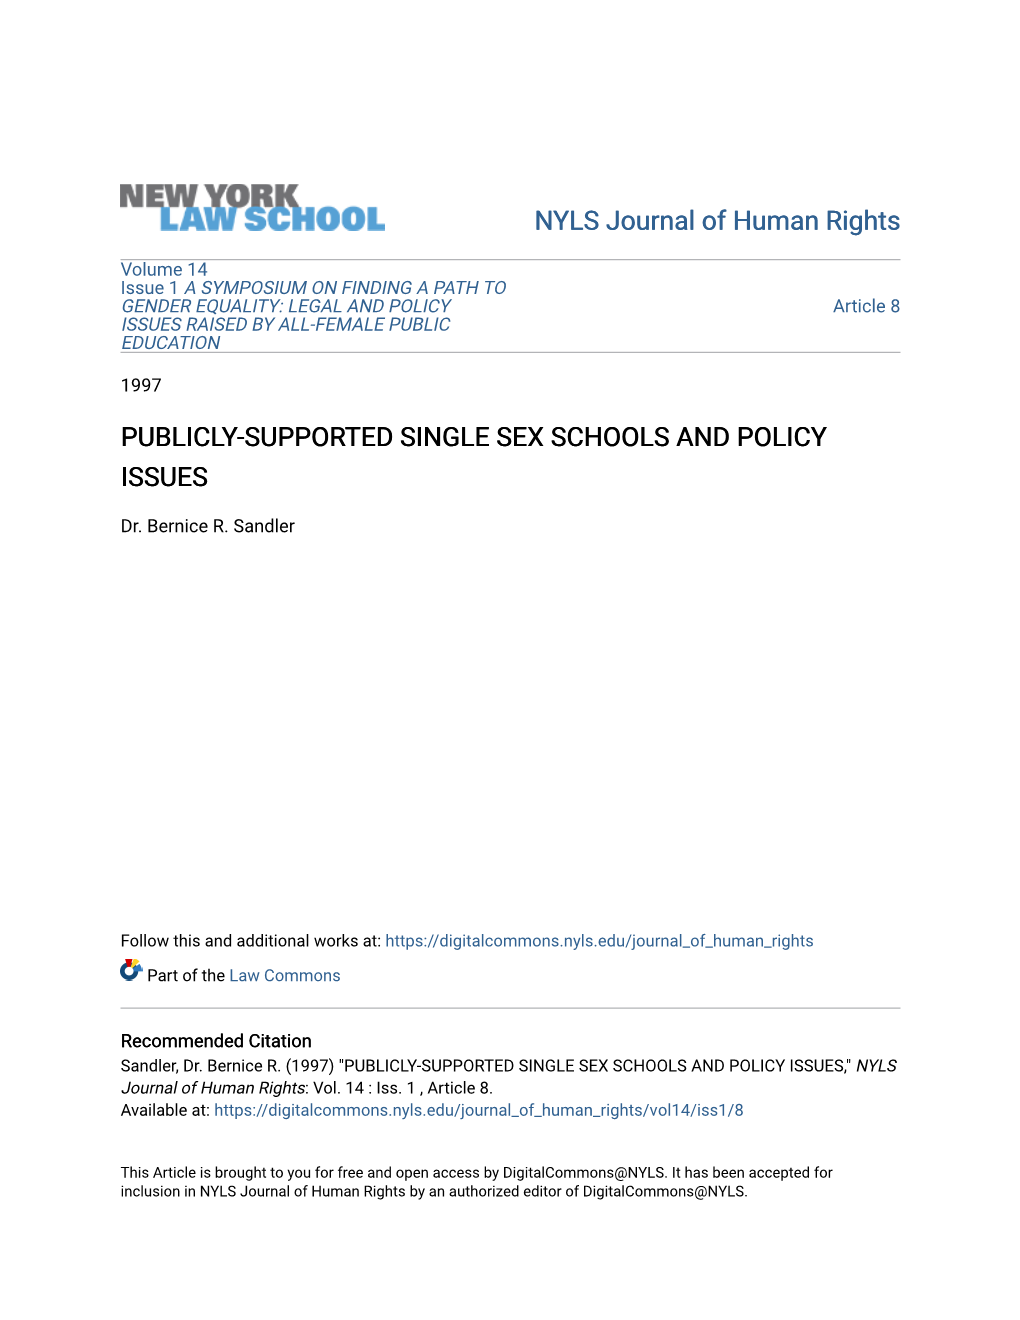 Publicly-Supported Single Sex Schools and Policy Issues